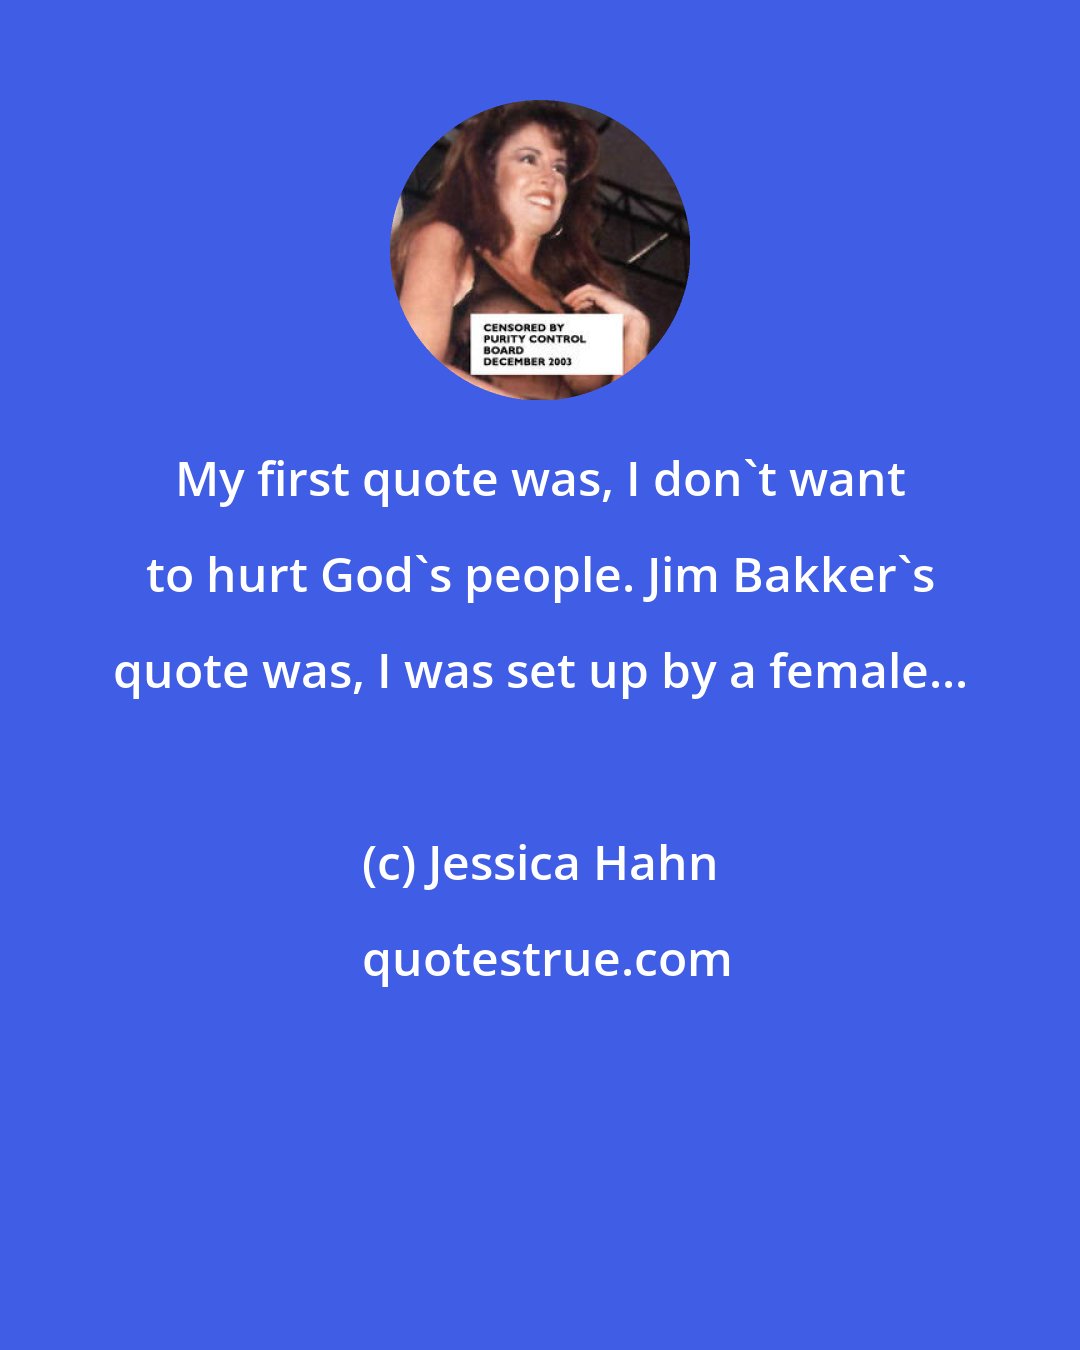 Jessica Hahn: My first quote was, I don't want to hurt God's people. Jim Bakker's quote was, I was set up by a female...